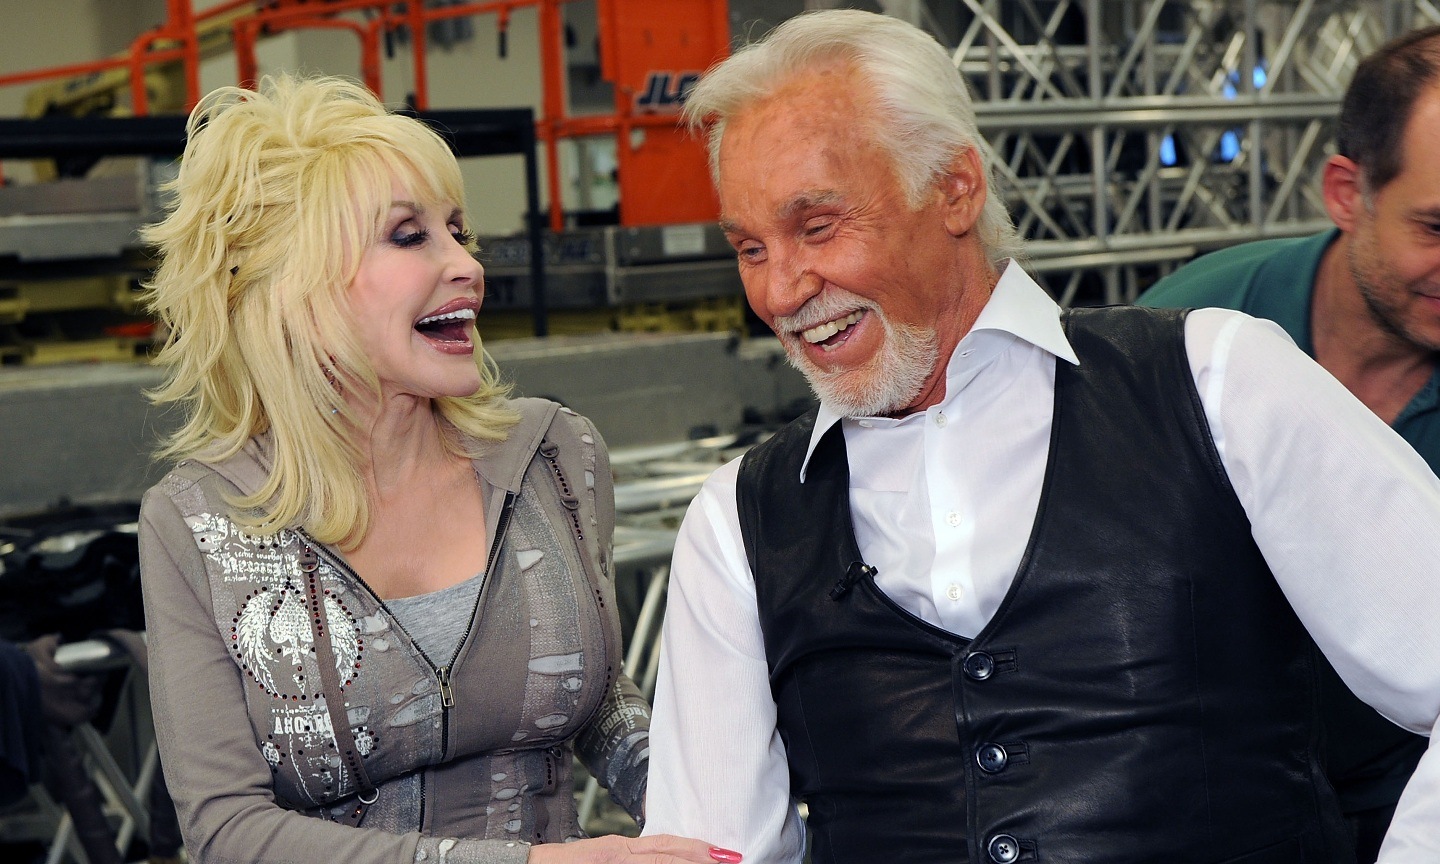 did dolly and kenny have an affair